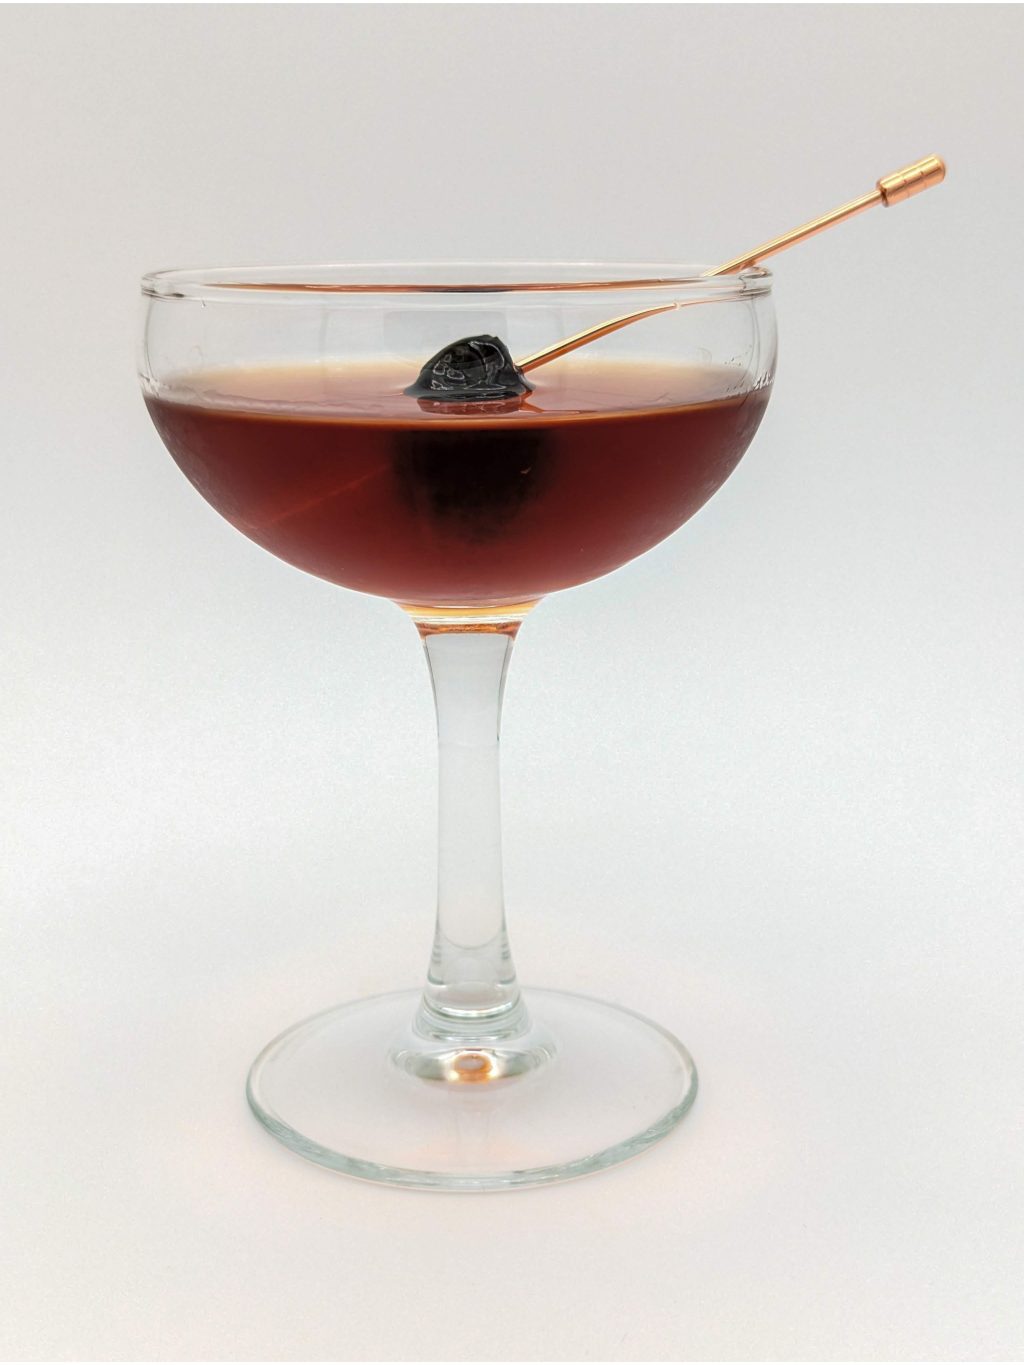 dark amber liquid in a coupe glass with a cherry for garnish